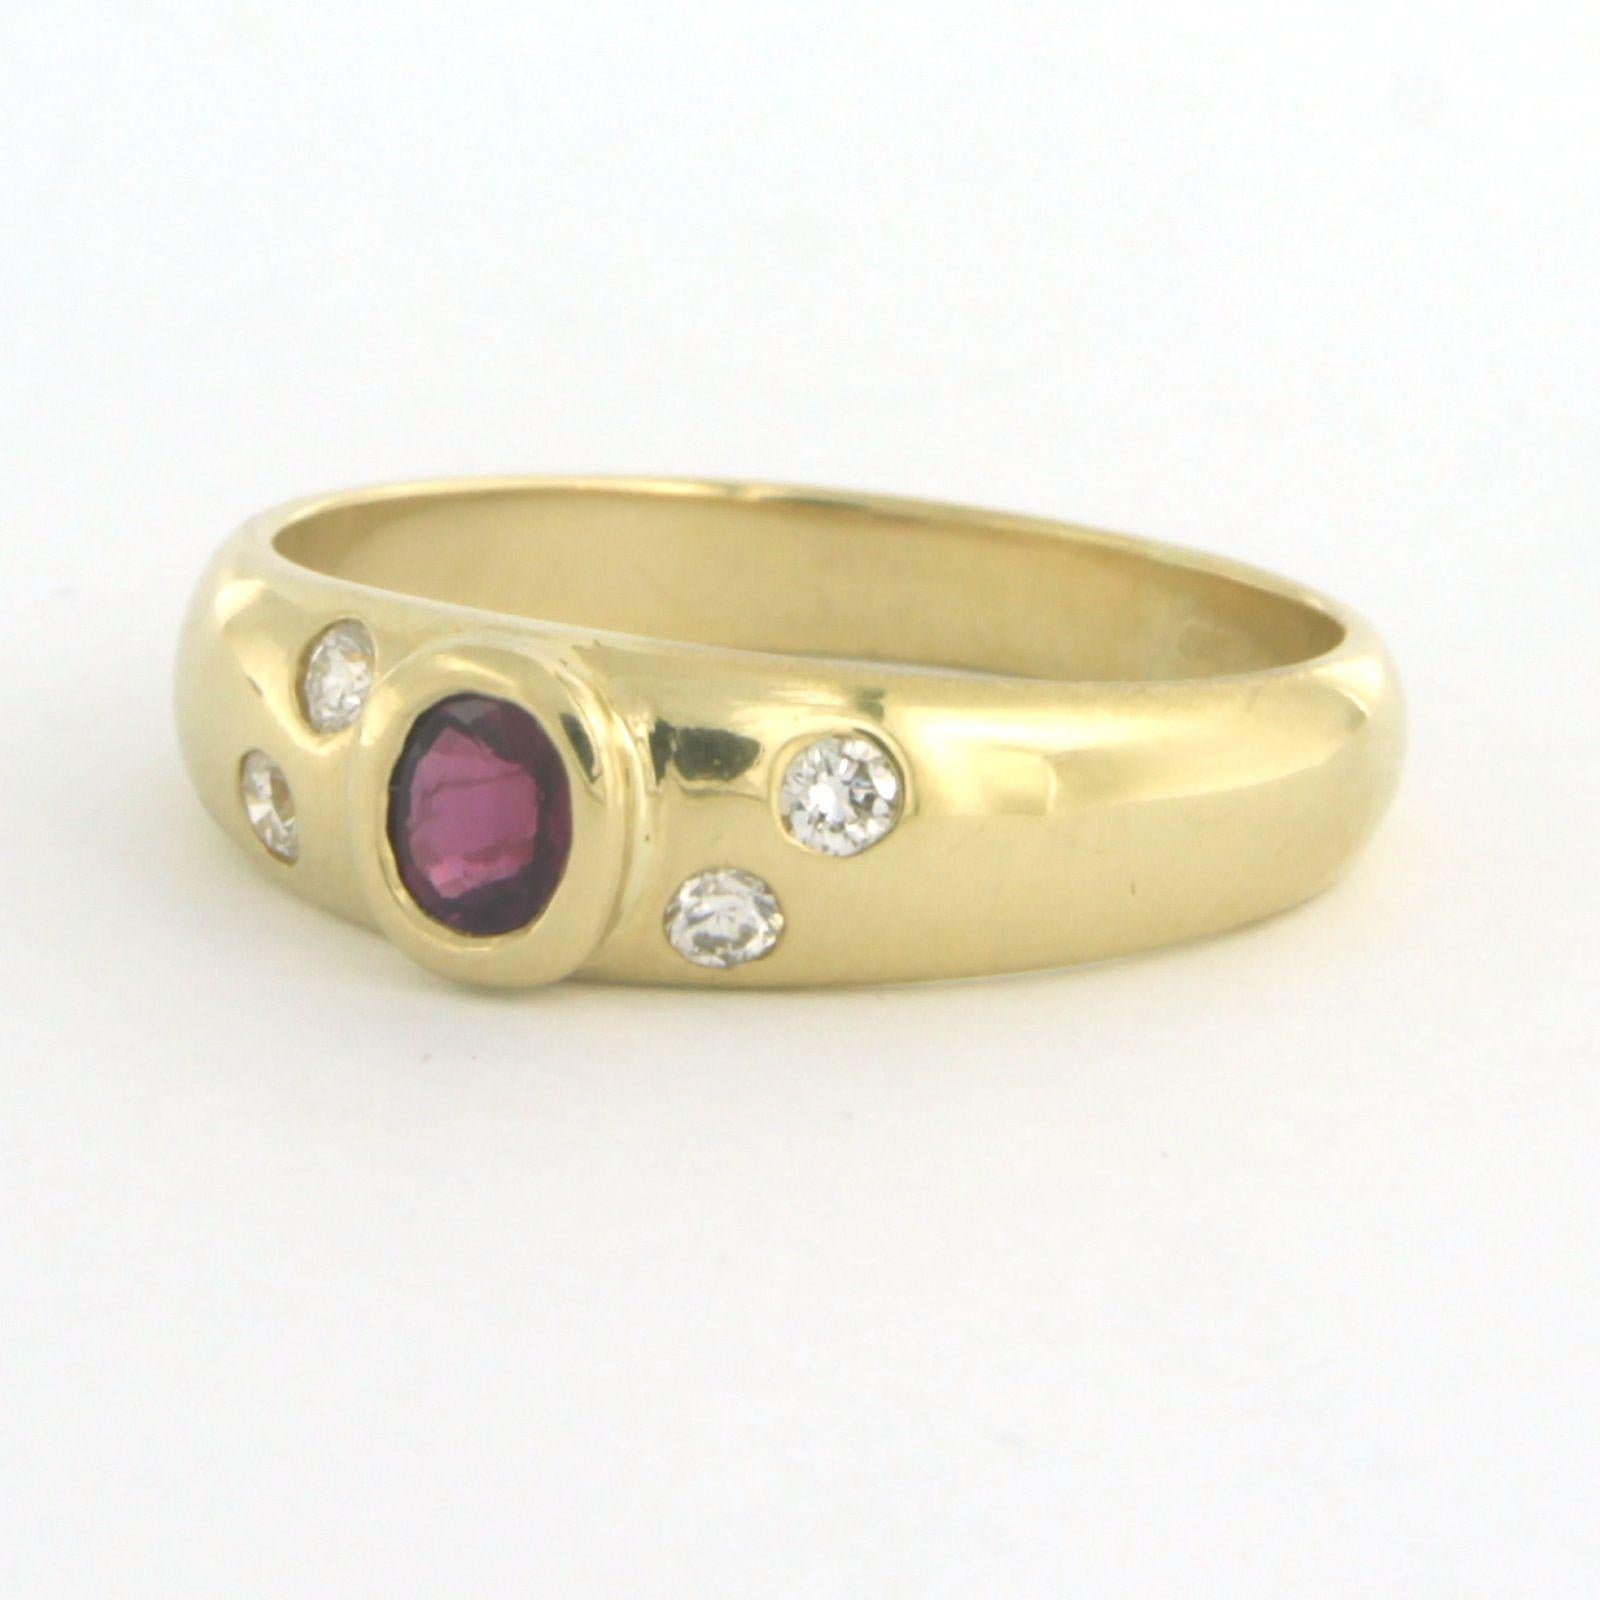 Brilliant Cut Fashion ring set with ruby and diamonds 18k yellow gold